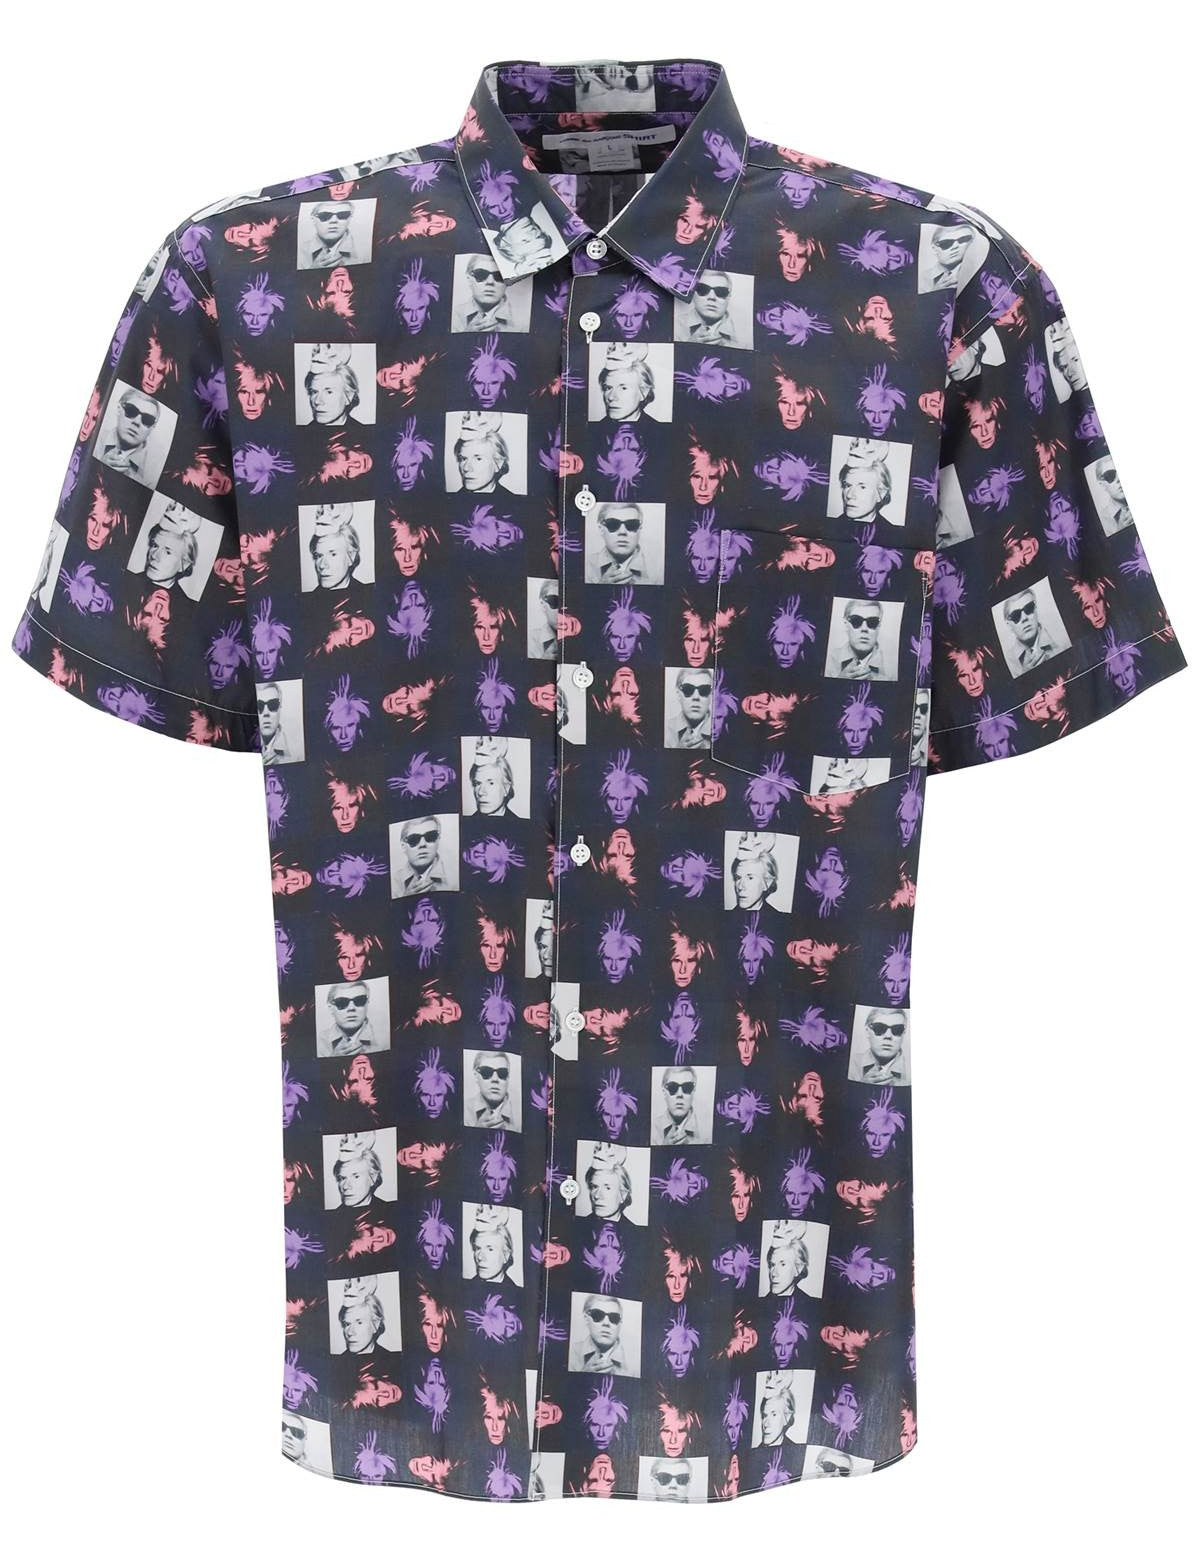 comme-des-garcons-shirt-short-sleeved-shirt-with-andy-warhol-print.jpg